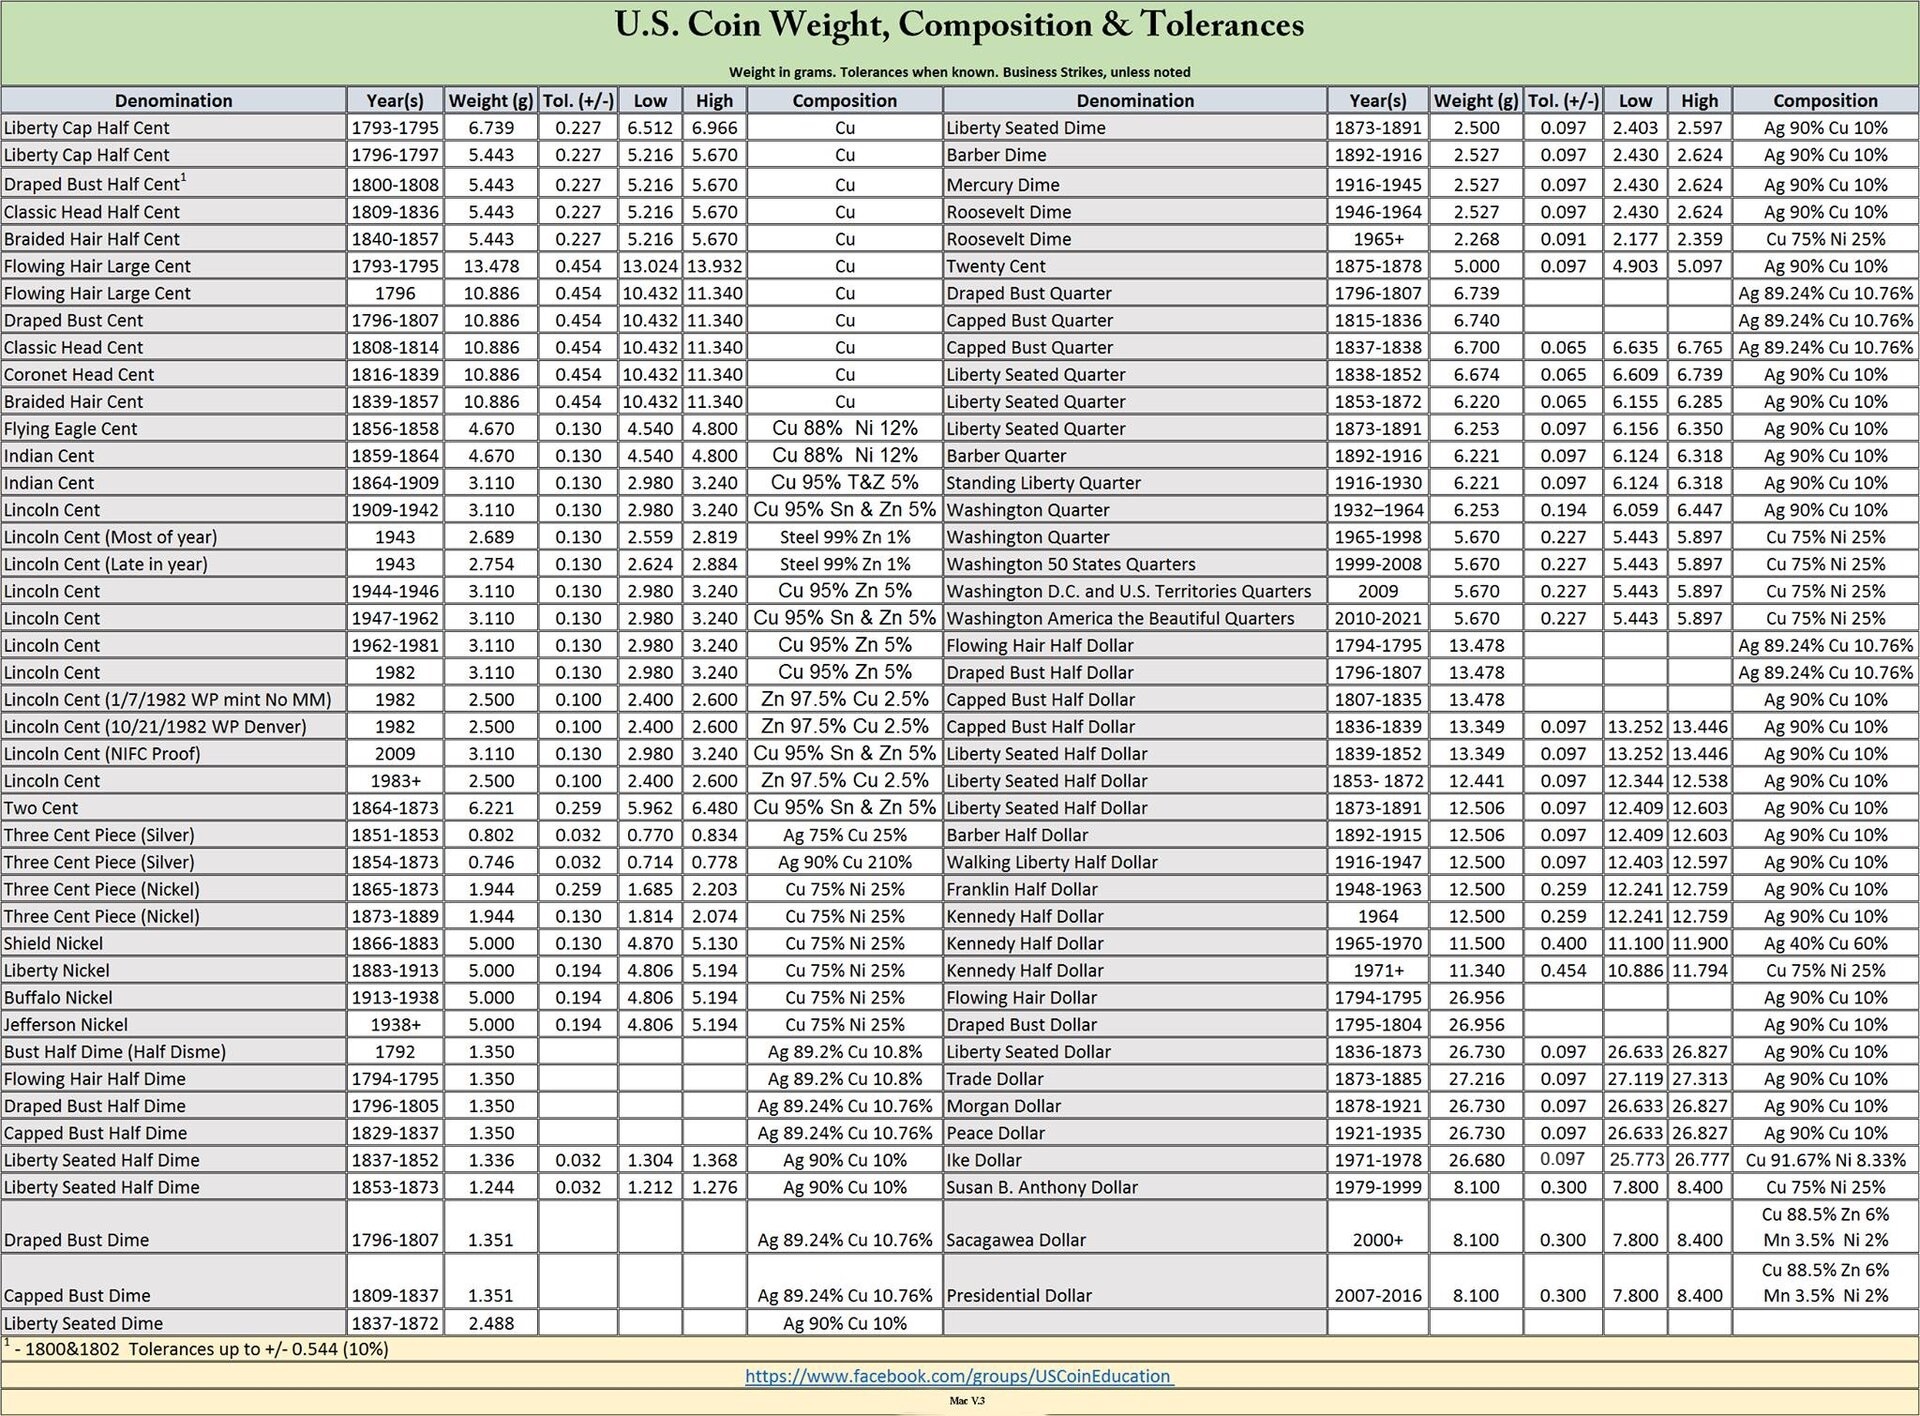 US Coins, weight Composition and Tolererances.jpg